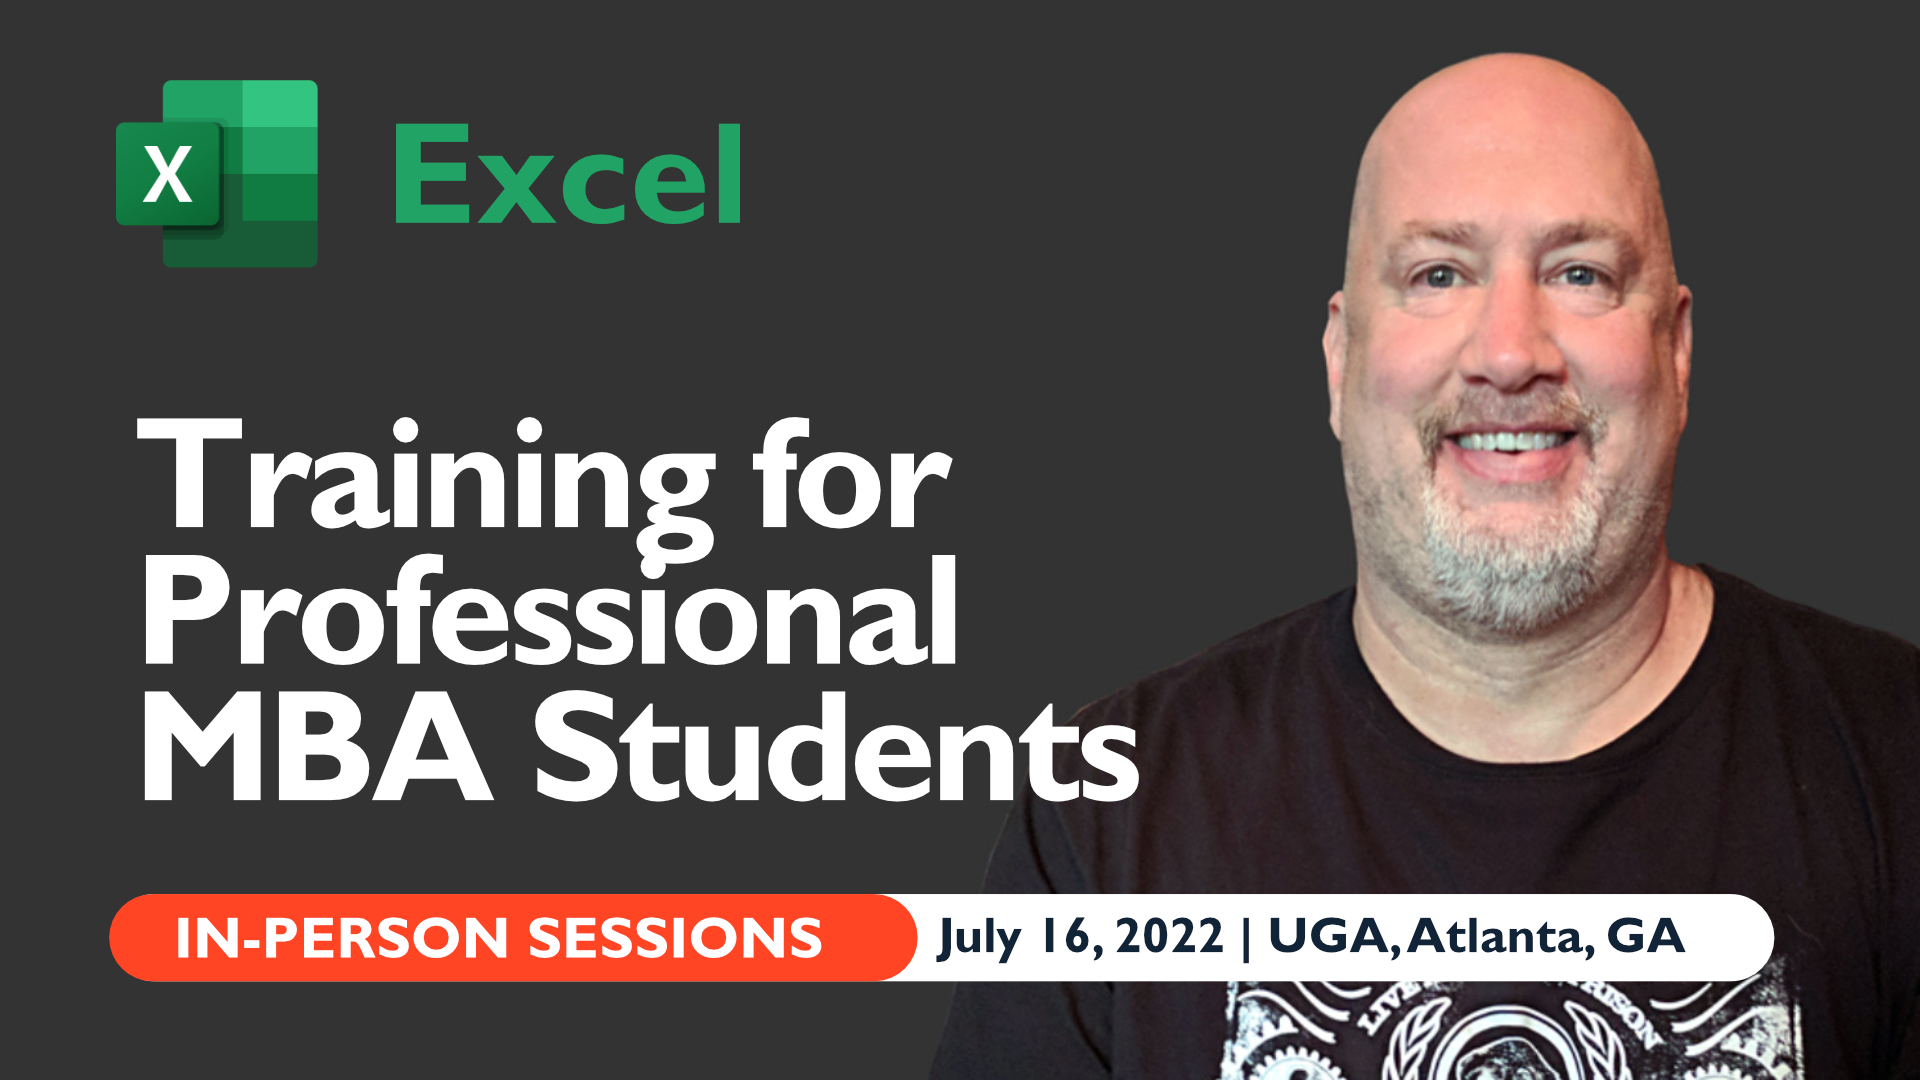 July 16, 2022 - UGA - Professional MBA Students - Excel Training with Chris Menard